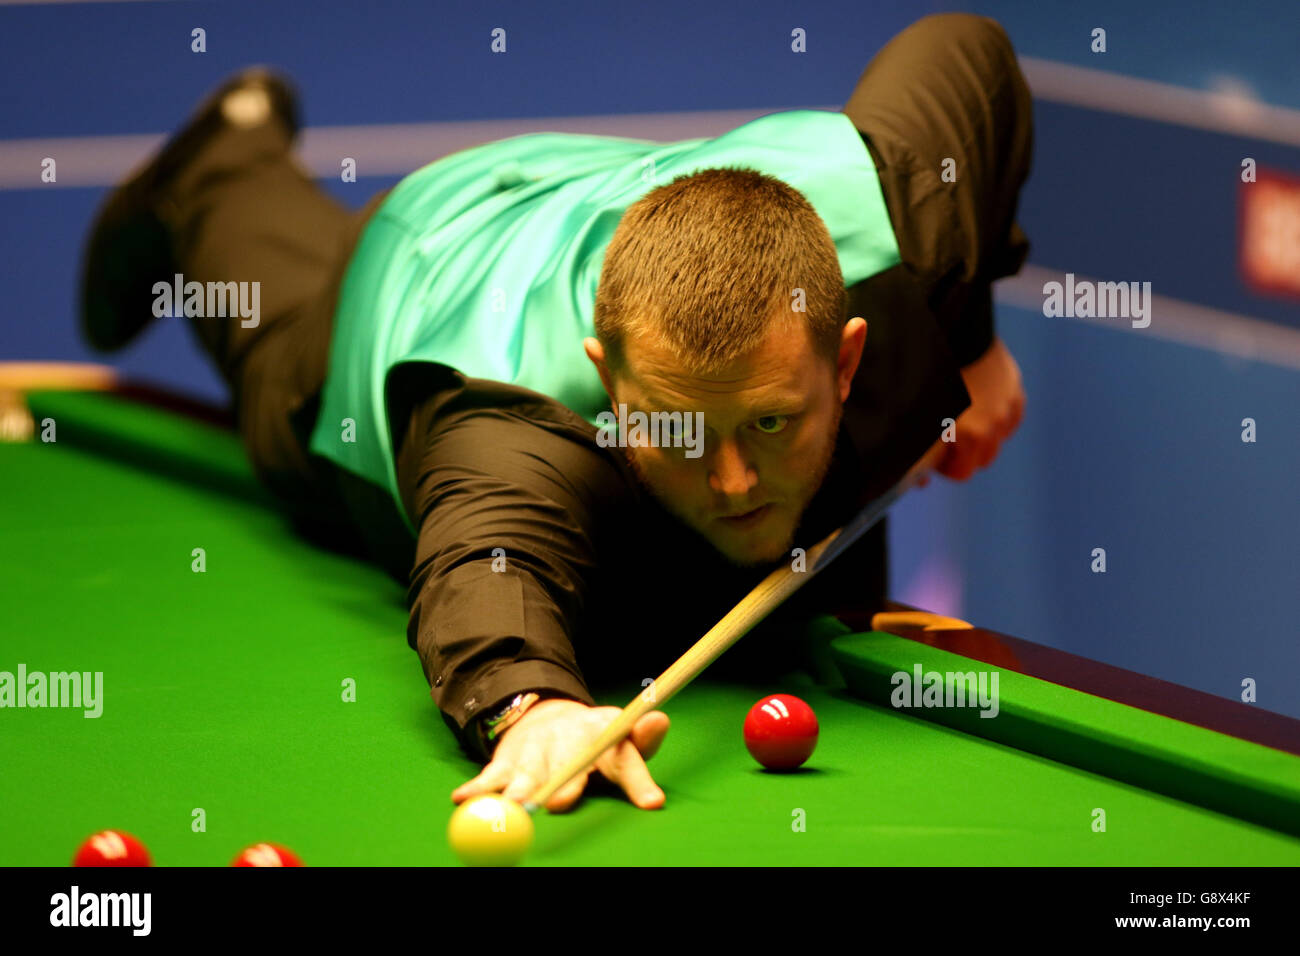 Mark Allen during day nine of the Betfred Snooker World Championships at the Crucible Theatre, Sheffield. Stock Photo